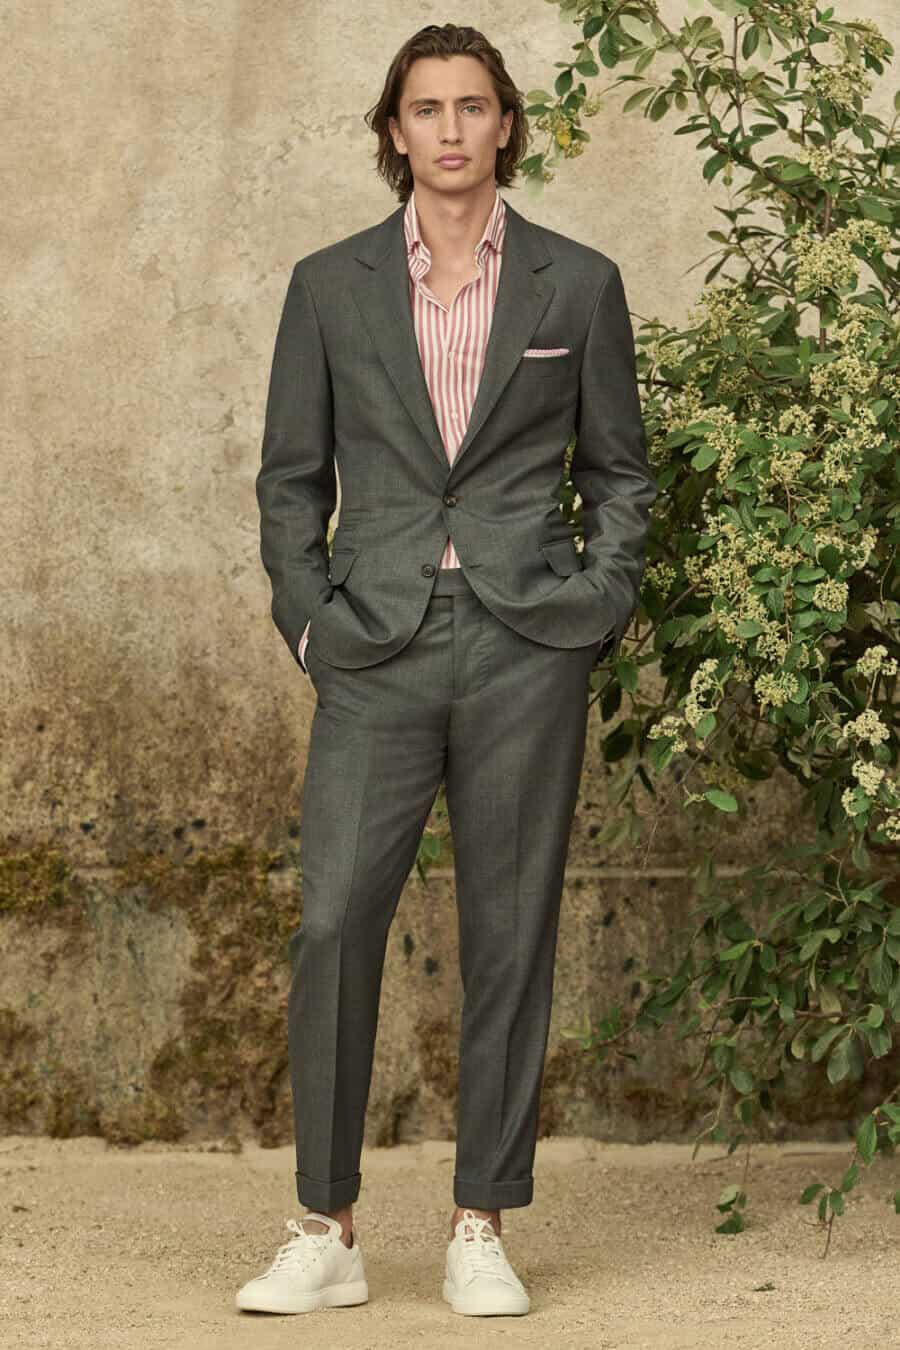 Men's suit, striped shirt and white sneakers outfit